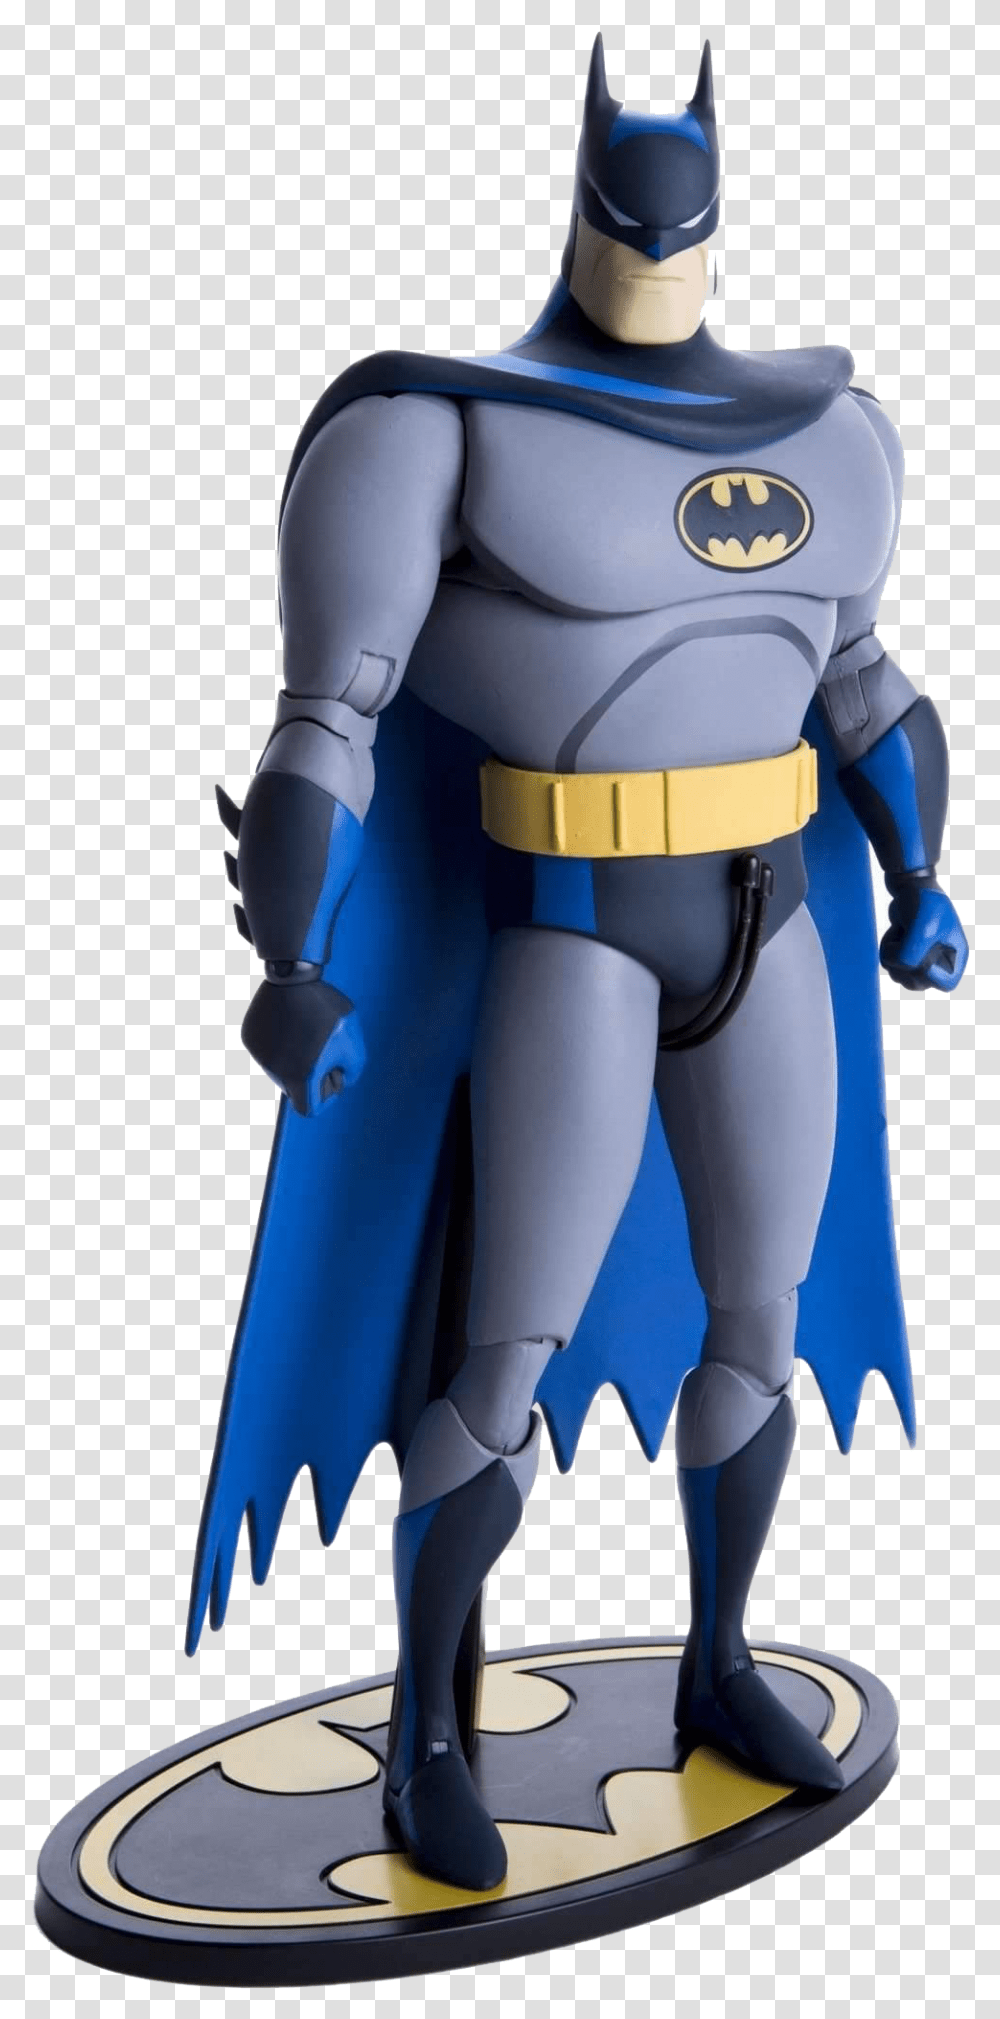 Batman Free Images Batman The Animated Series 6 Figure, Toy, Sweets, Figurine, Costume Transparent Png